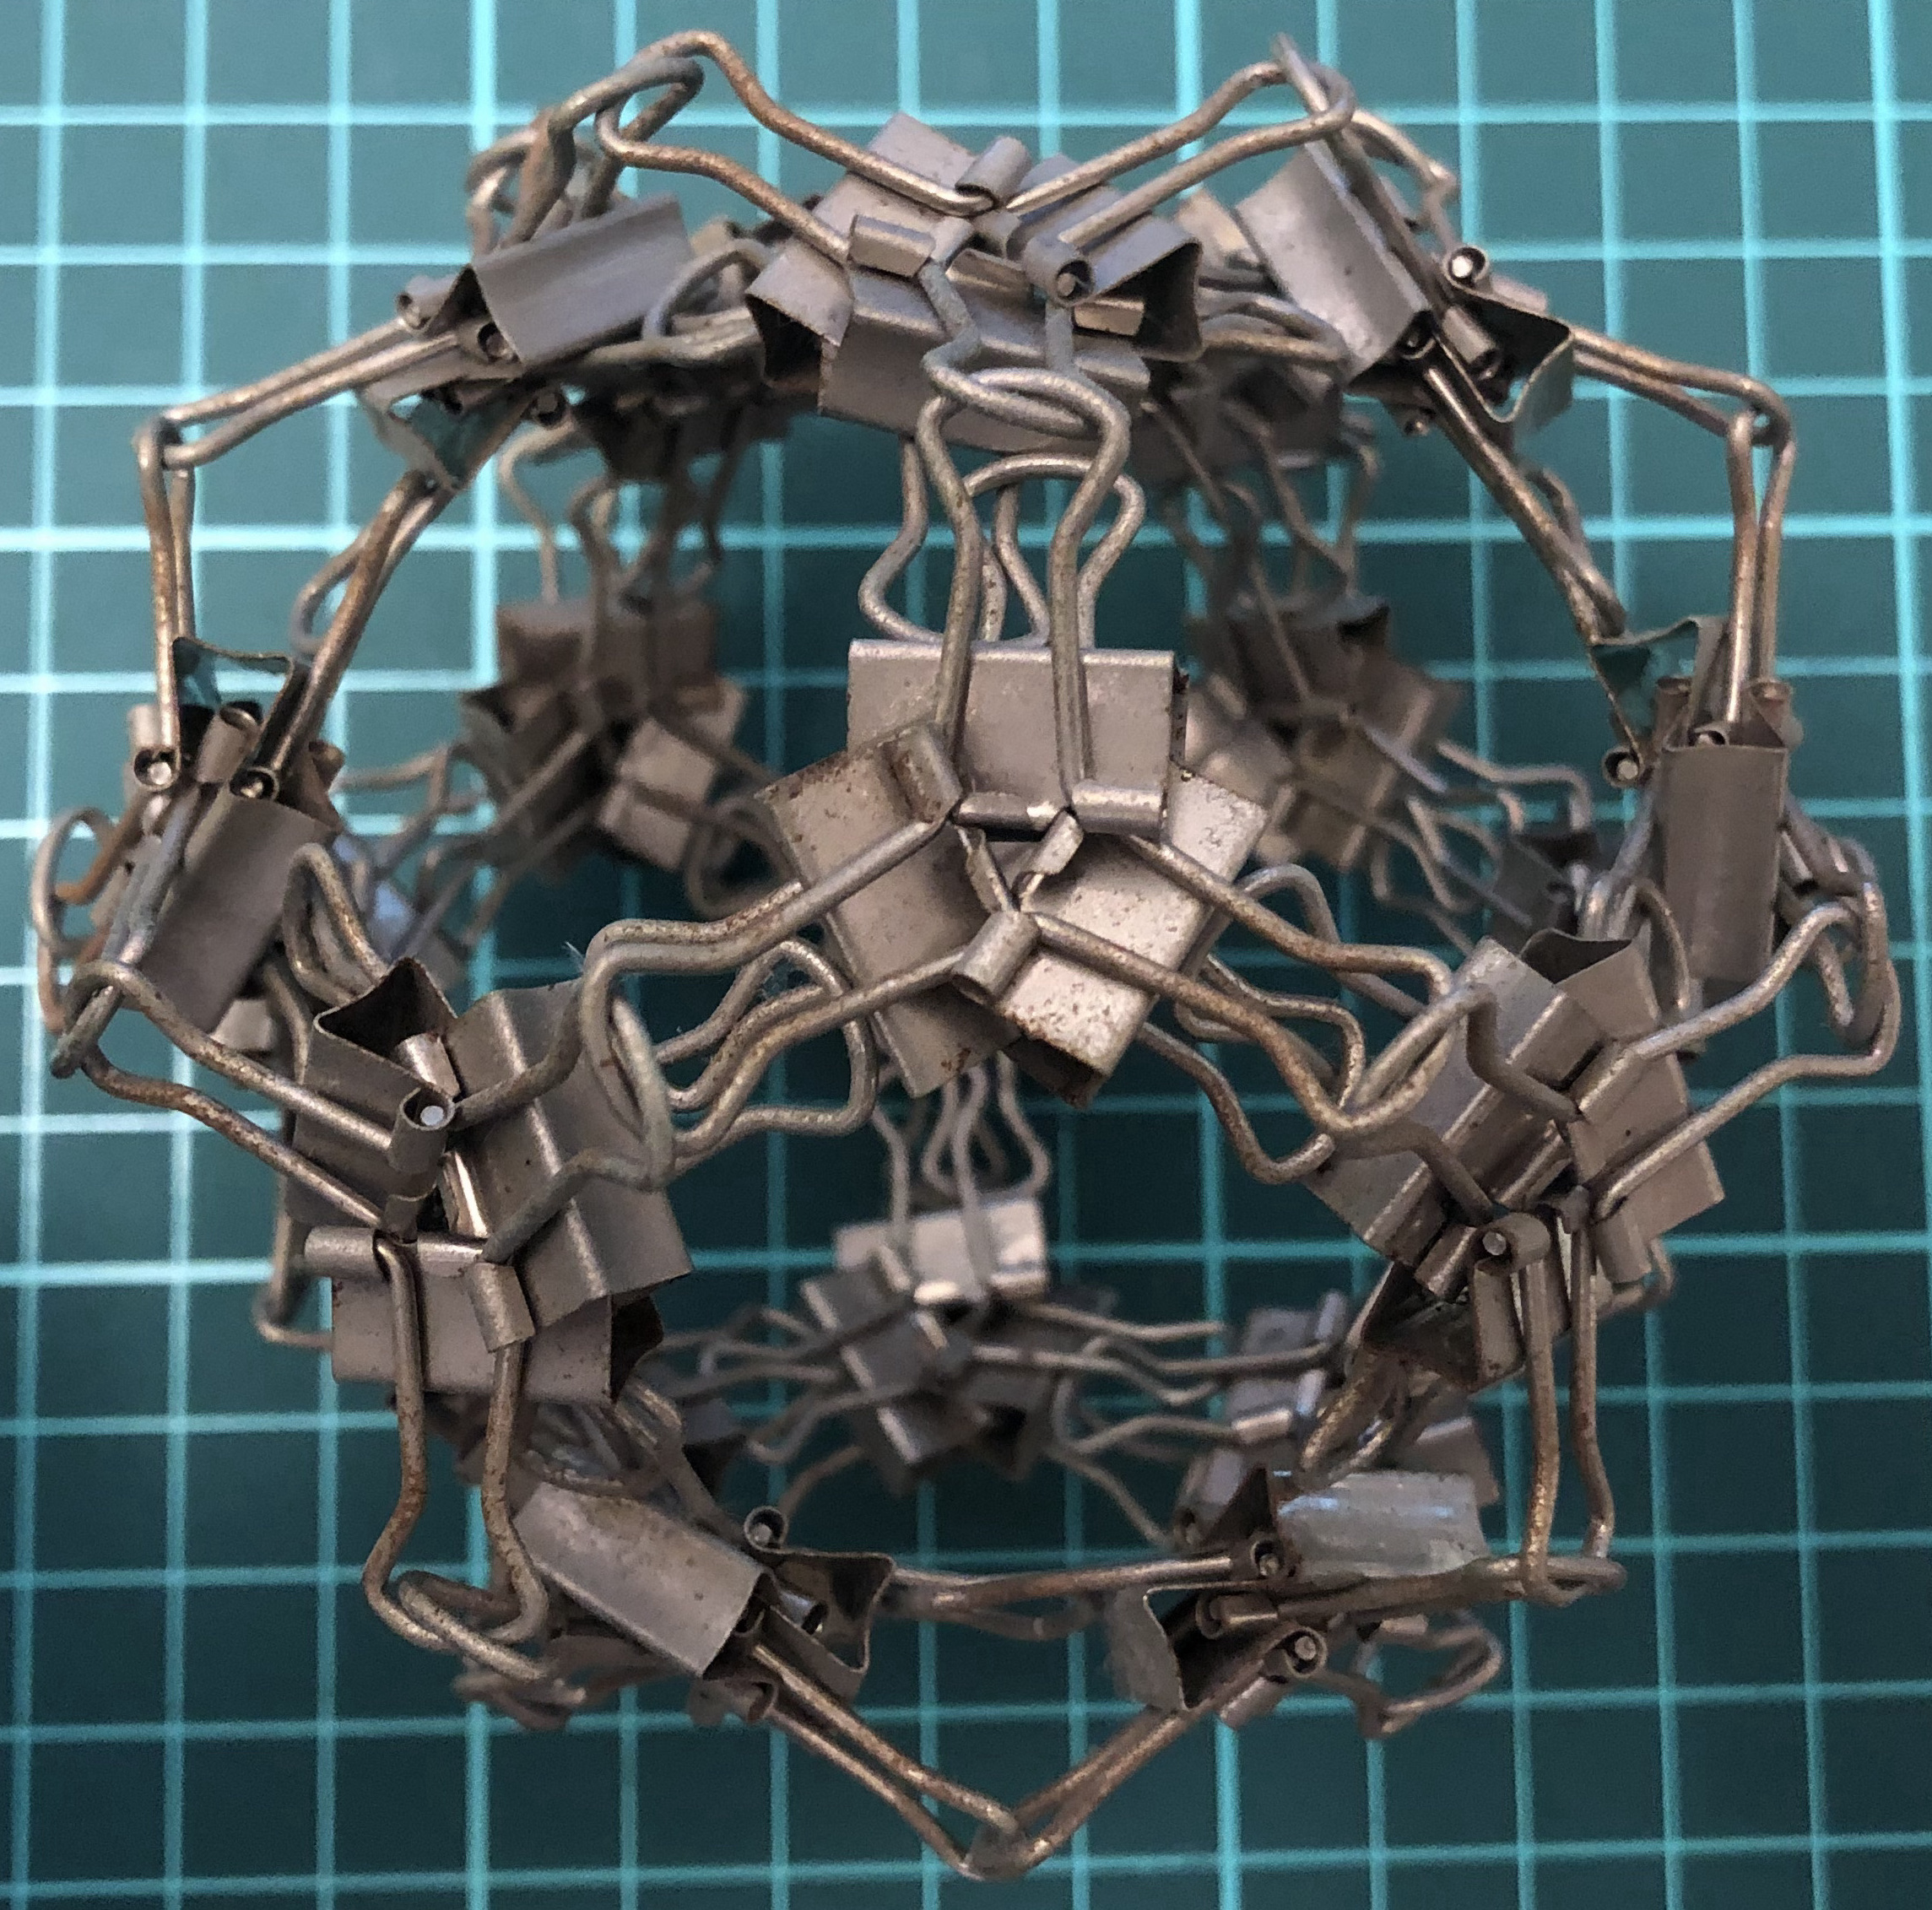 60 clips forming 30 W-edges forming dodecahedron